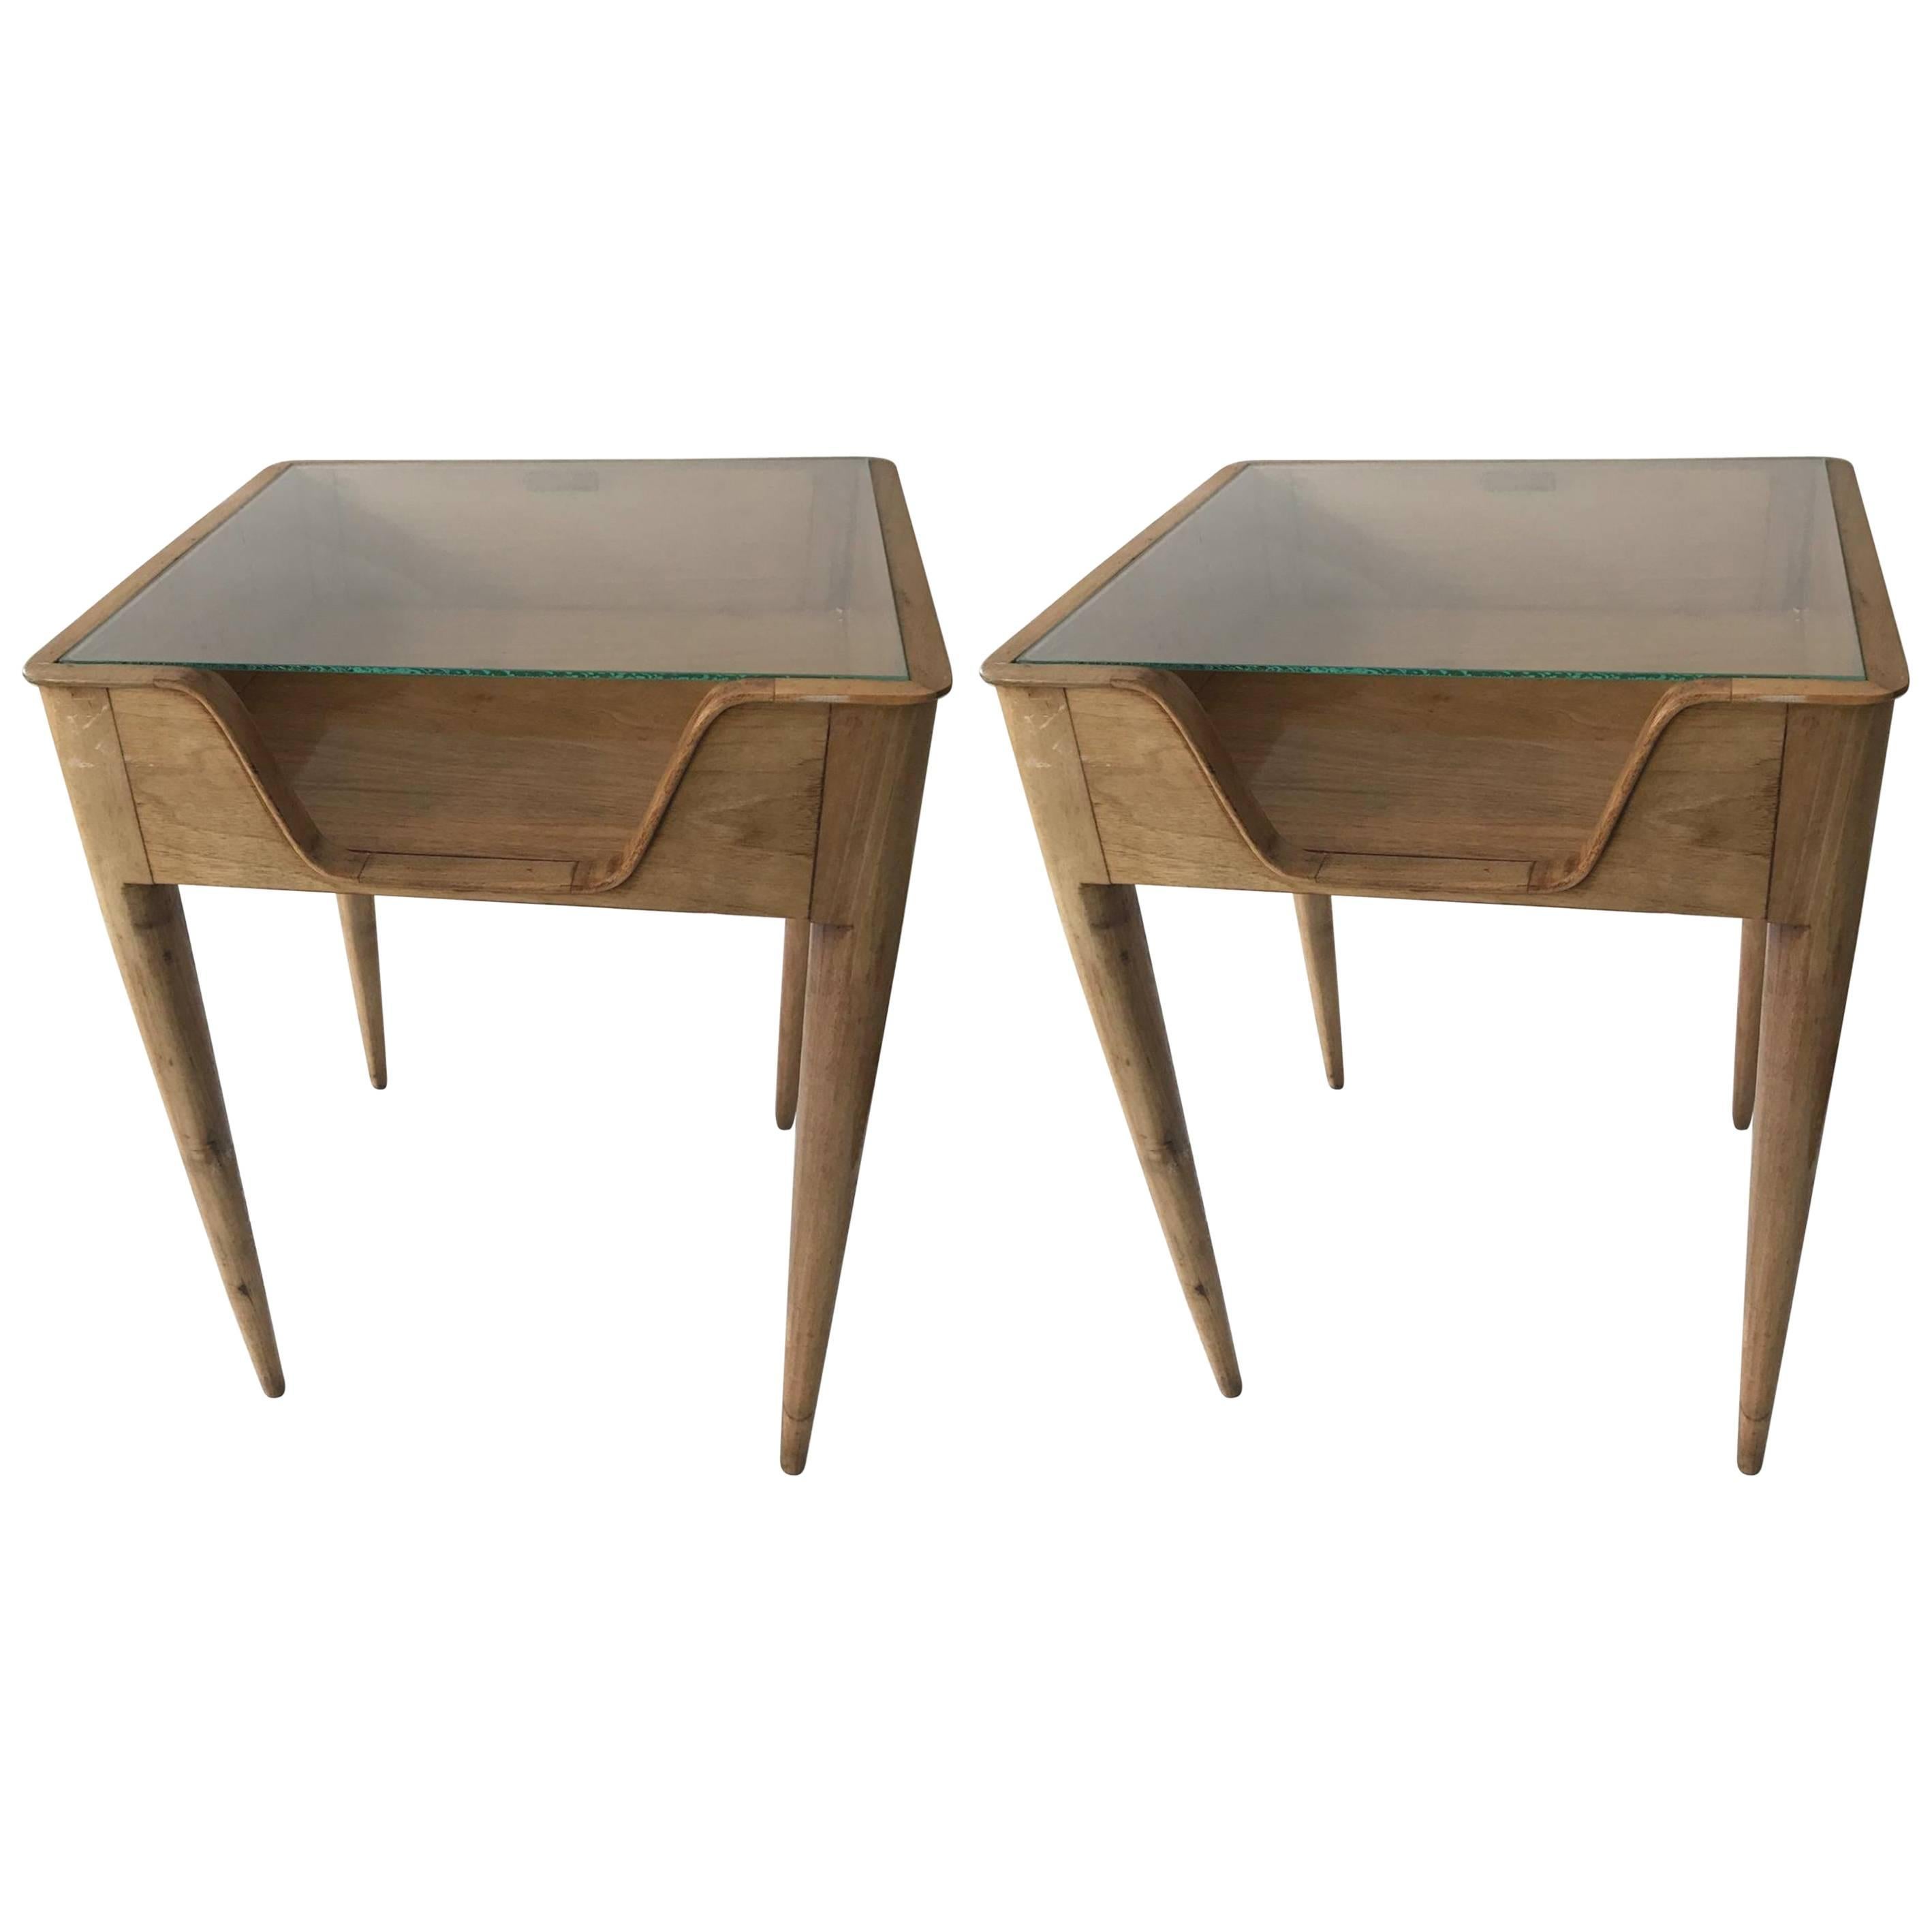 Pair of Side Tables circa 1937 Attributed to Gio Ponti, Italian, Milan For Sale